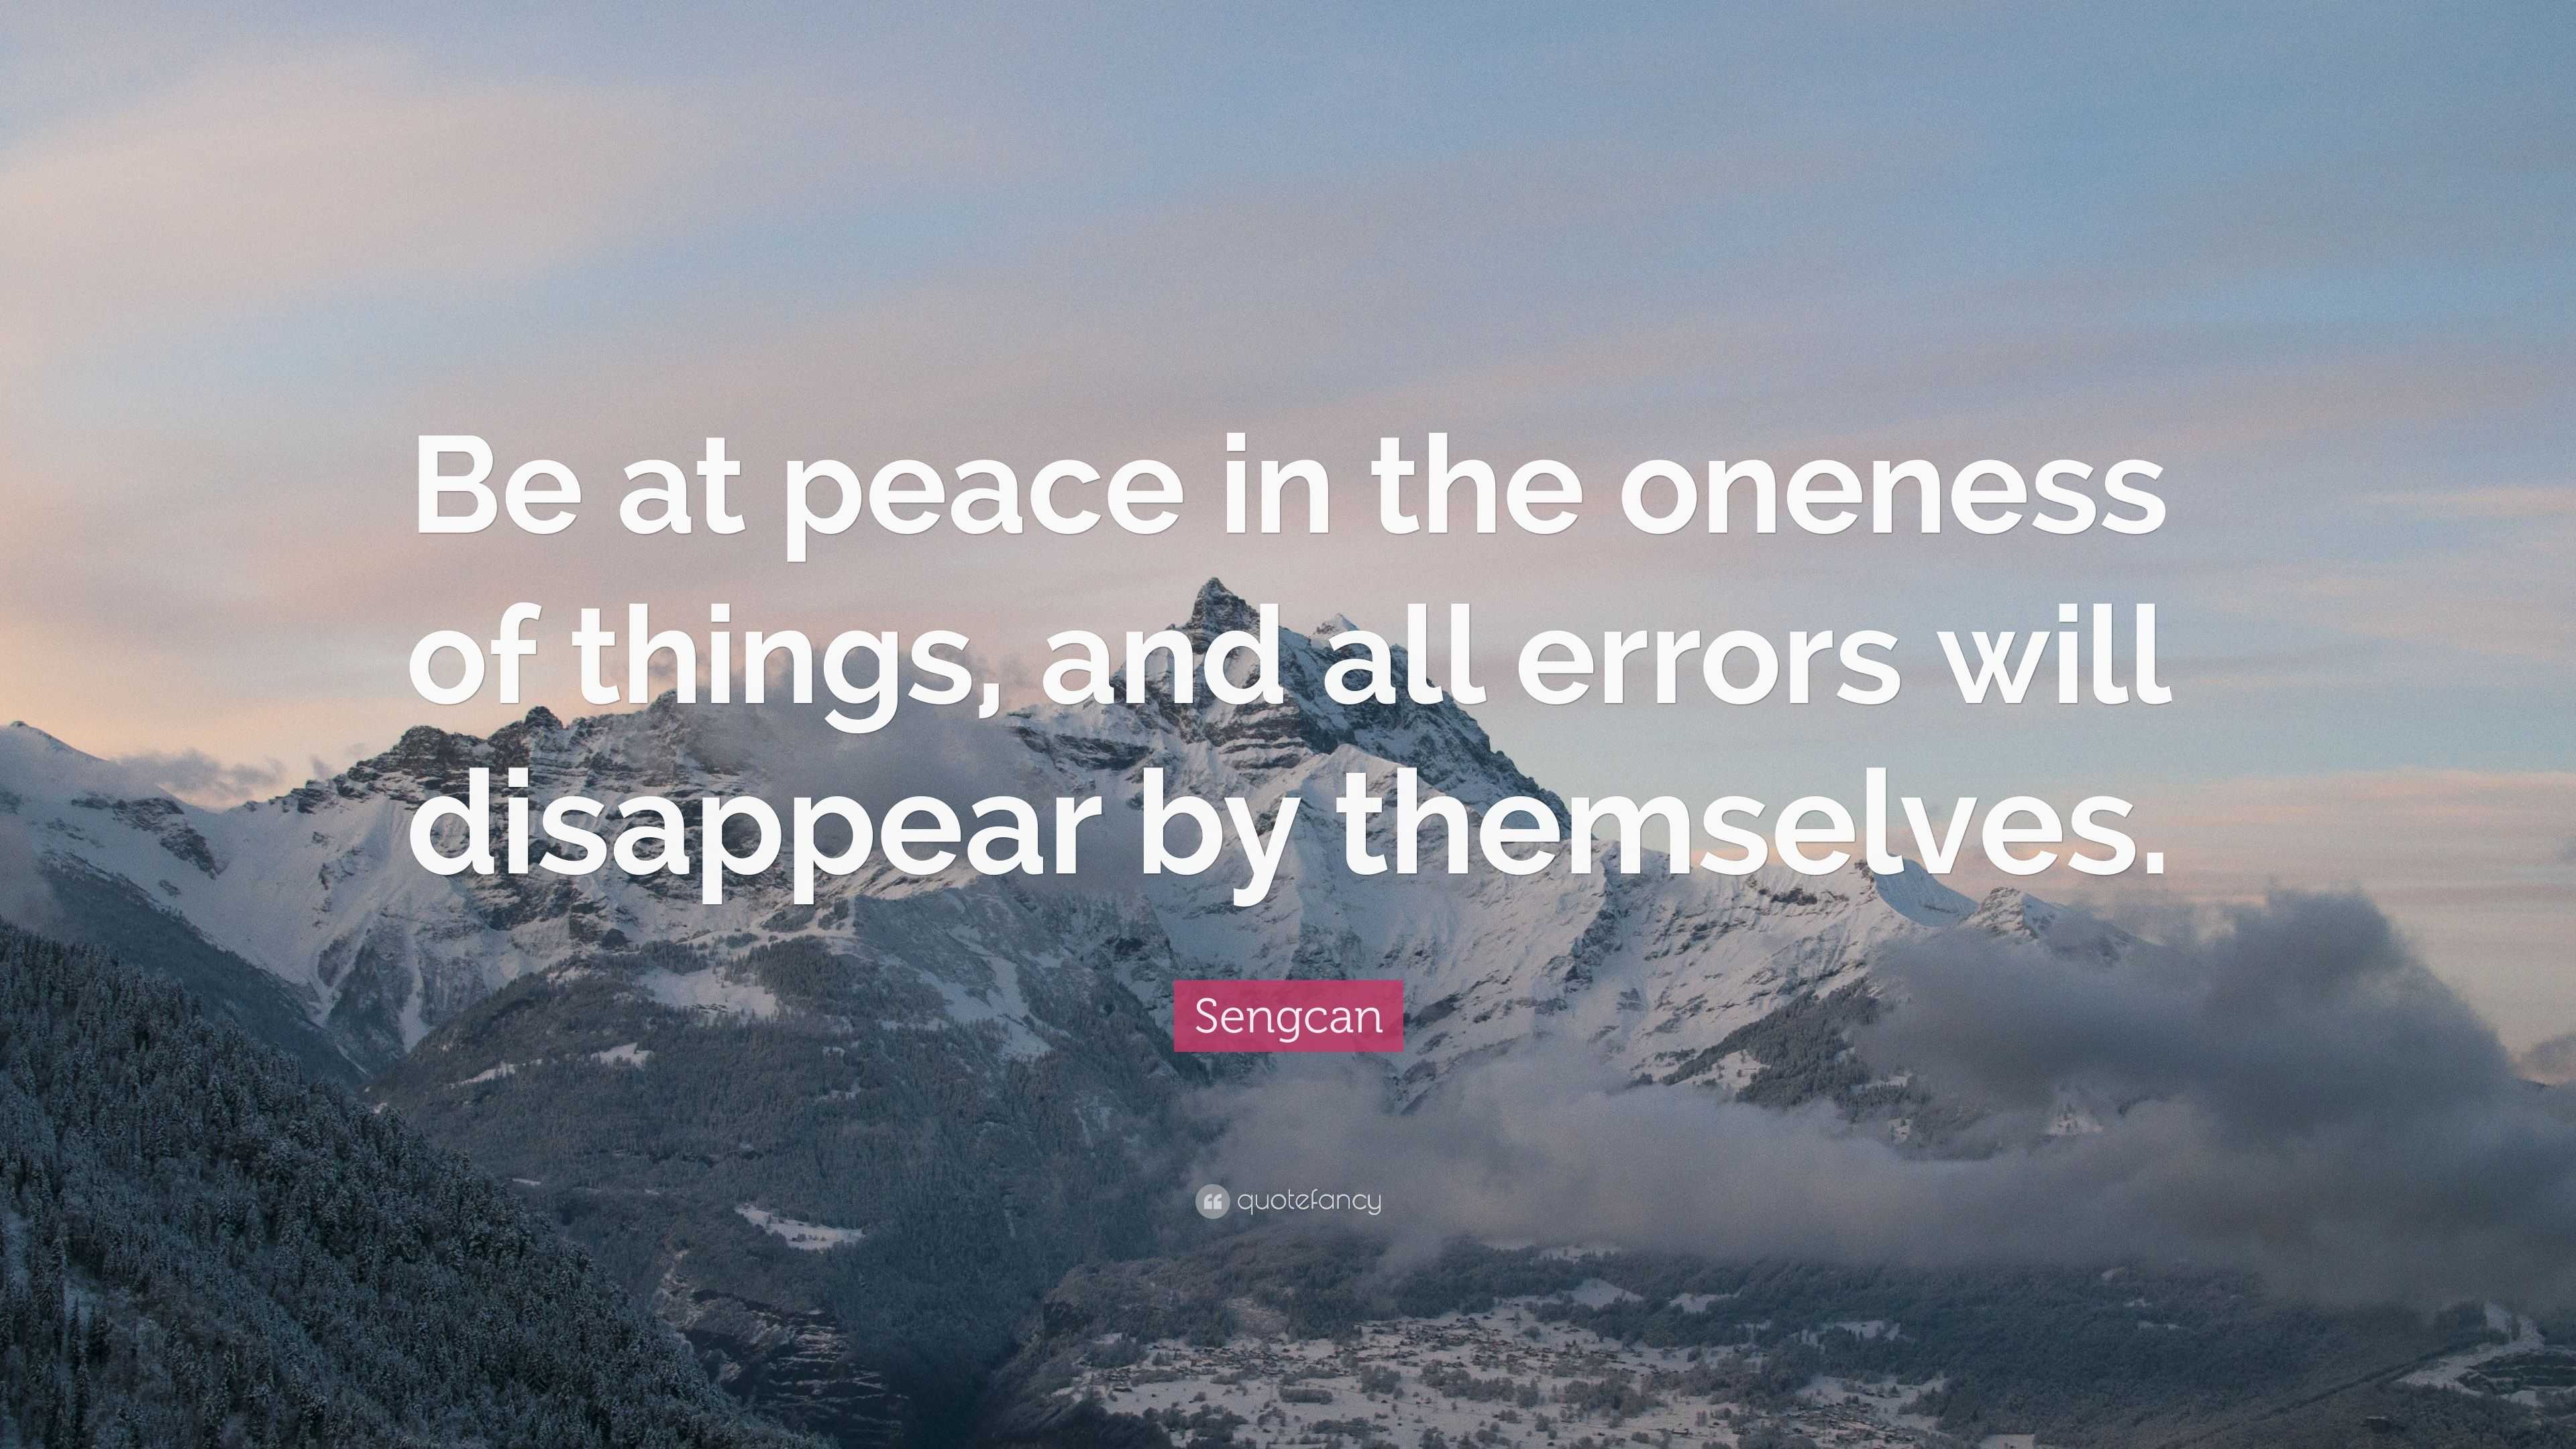 Sengcan Quote: “Be at peace in the oneness of things, and all errors ...